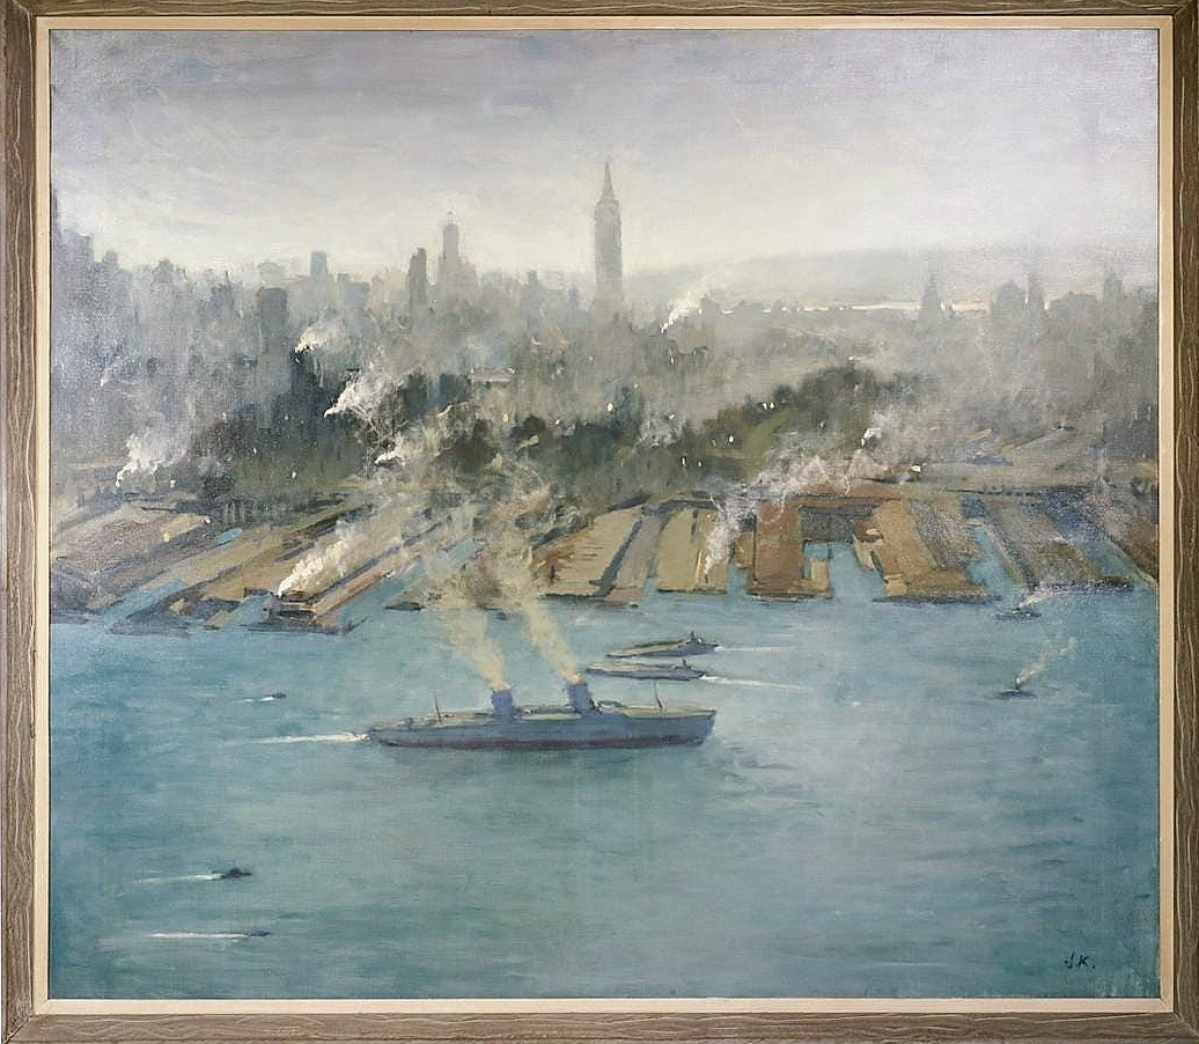 What would seem like a miserable day in Manhattan — dark clouds blocking out any semblance of the sun, a completely gray environment — is enriched with the color of the Hudson River in this scene by John Koch (American/France, 1909-1978), which sold for $24,000. The auction house said this was an early work by the artist, dating to his early Impressionist period in the 1930s.